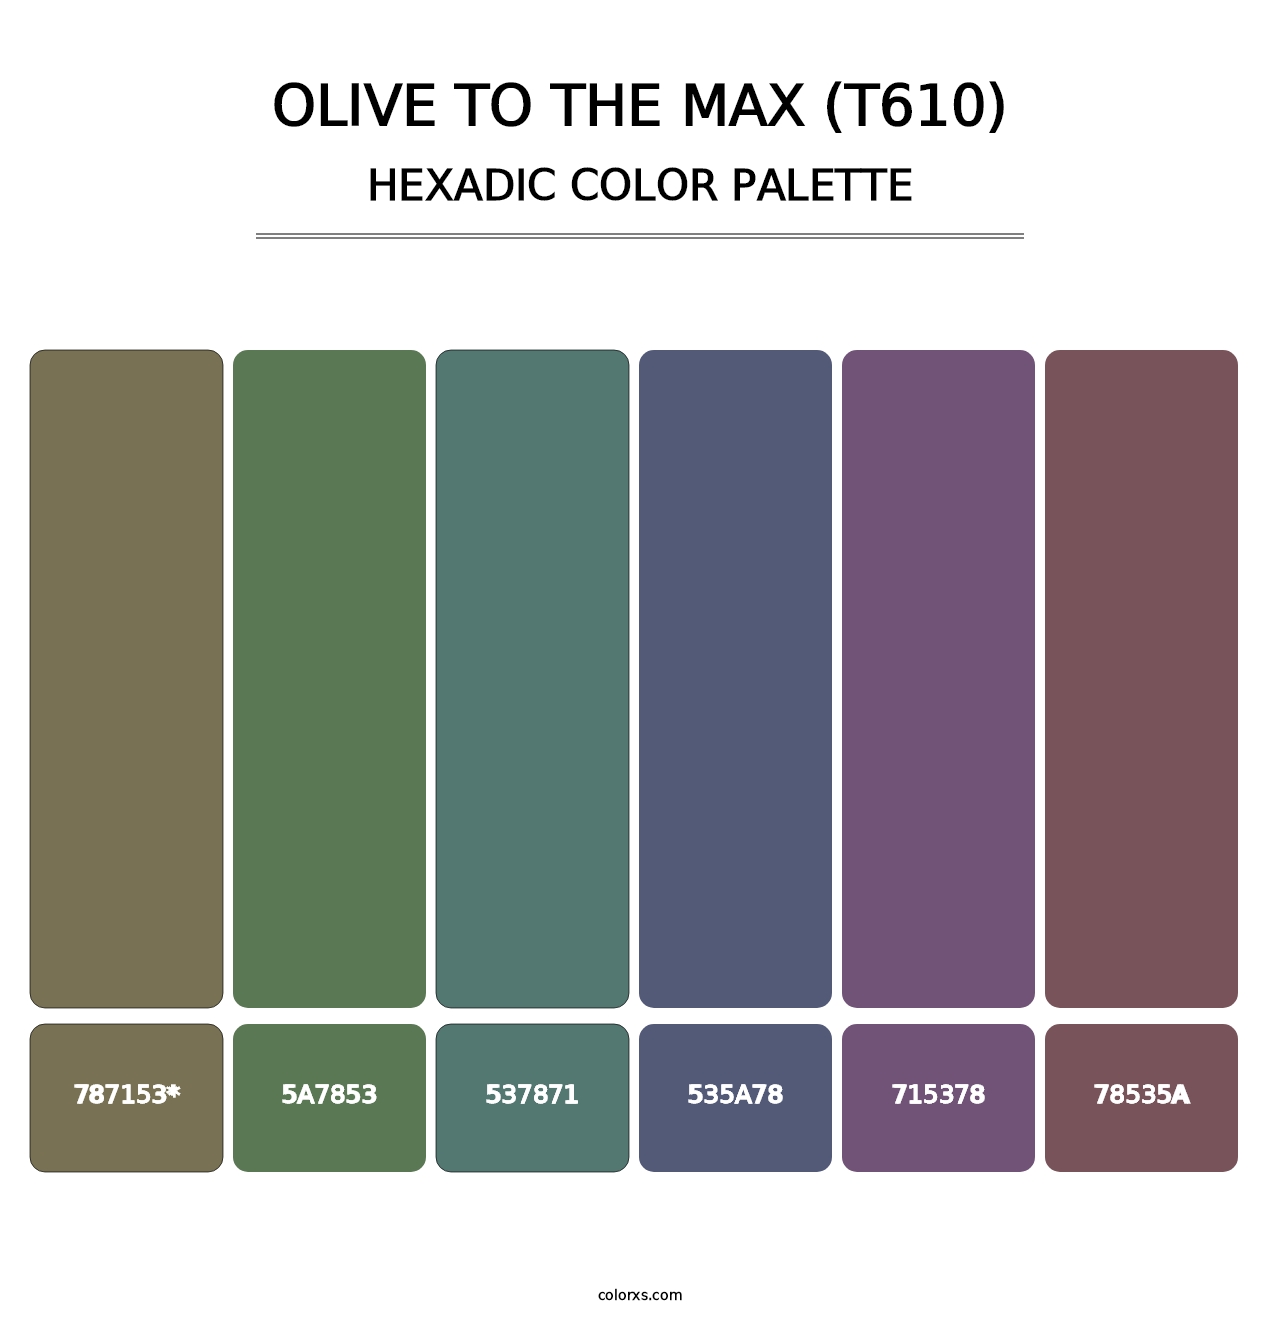 Olive to the Max (T610) - Hexadic Color Palette